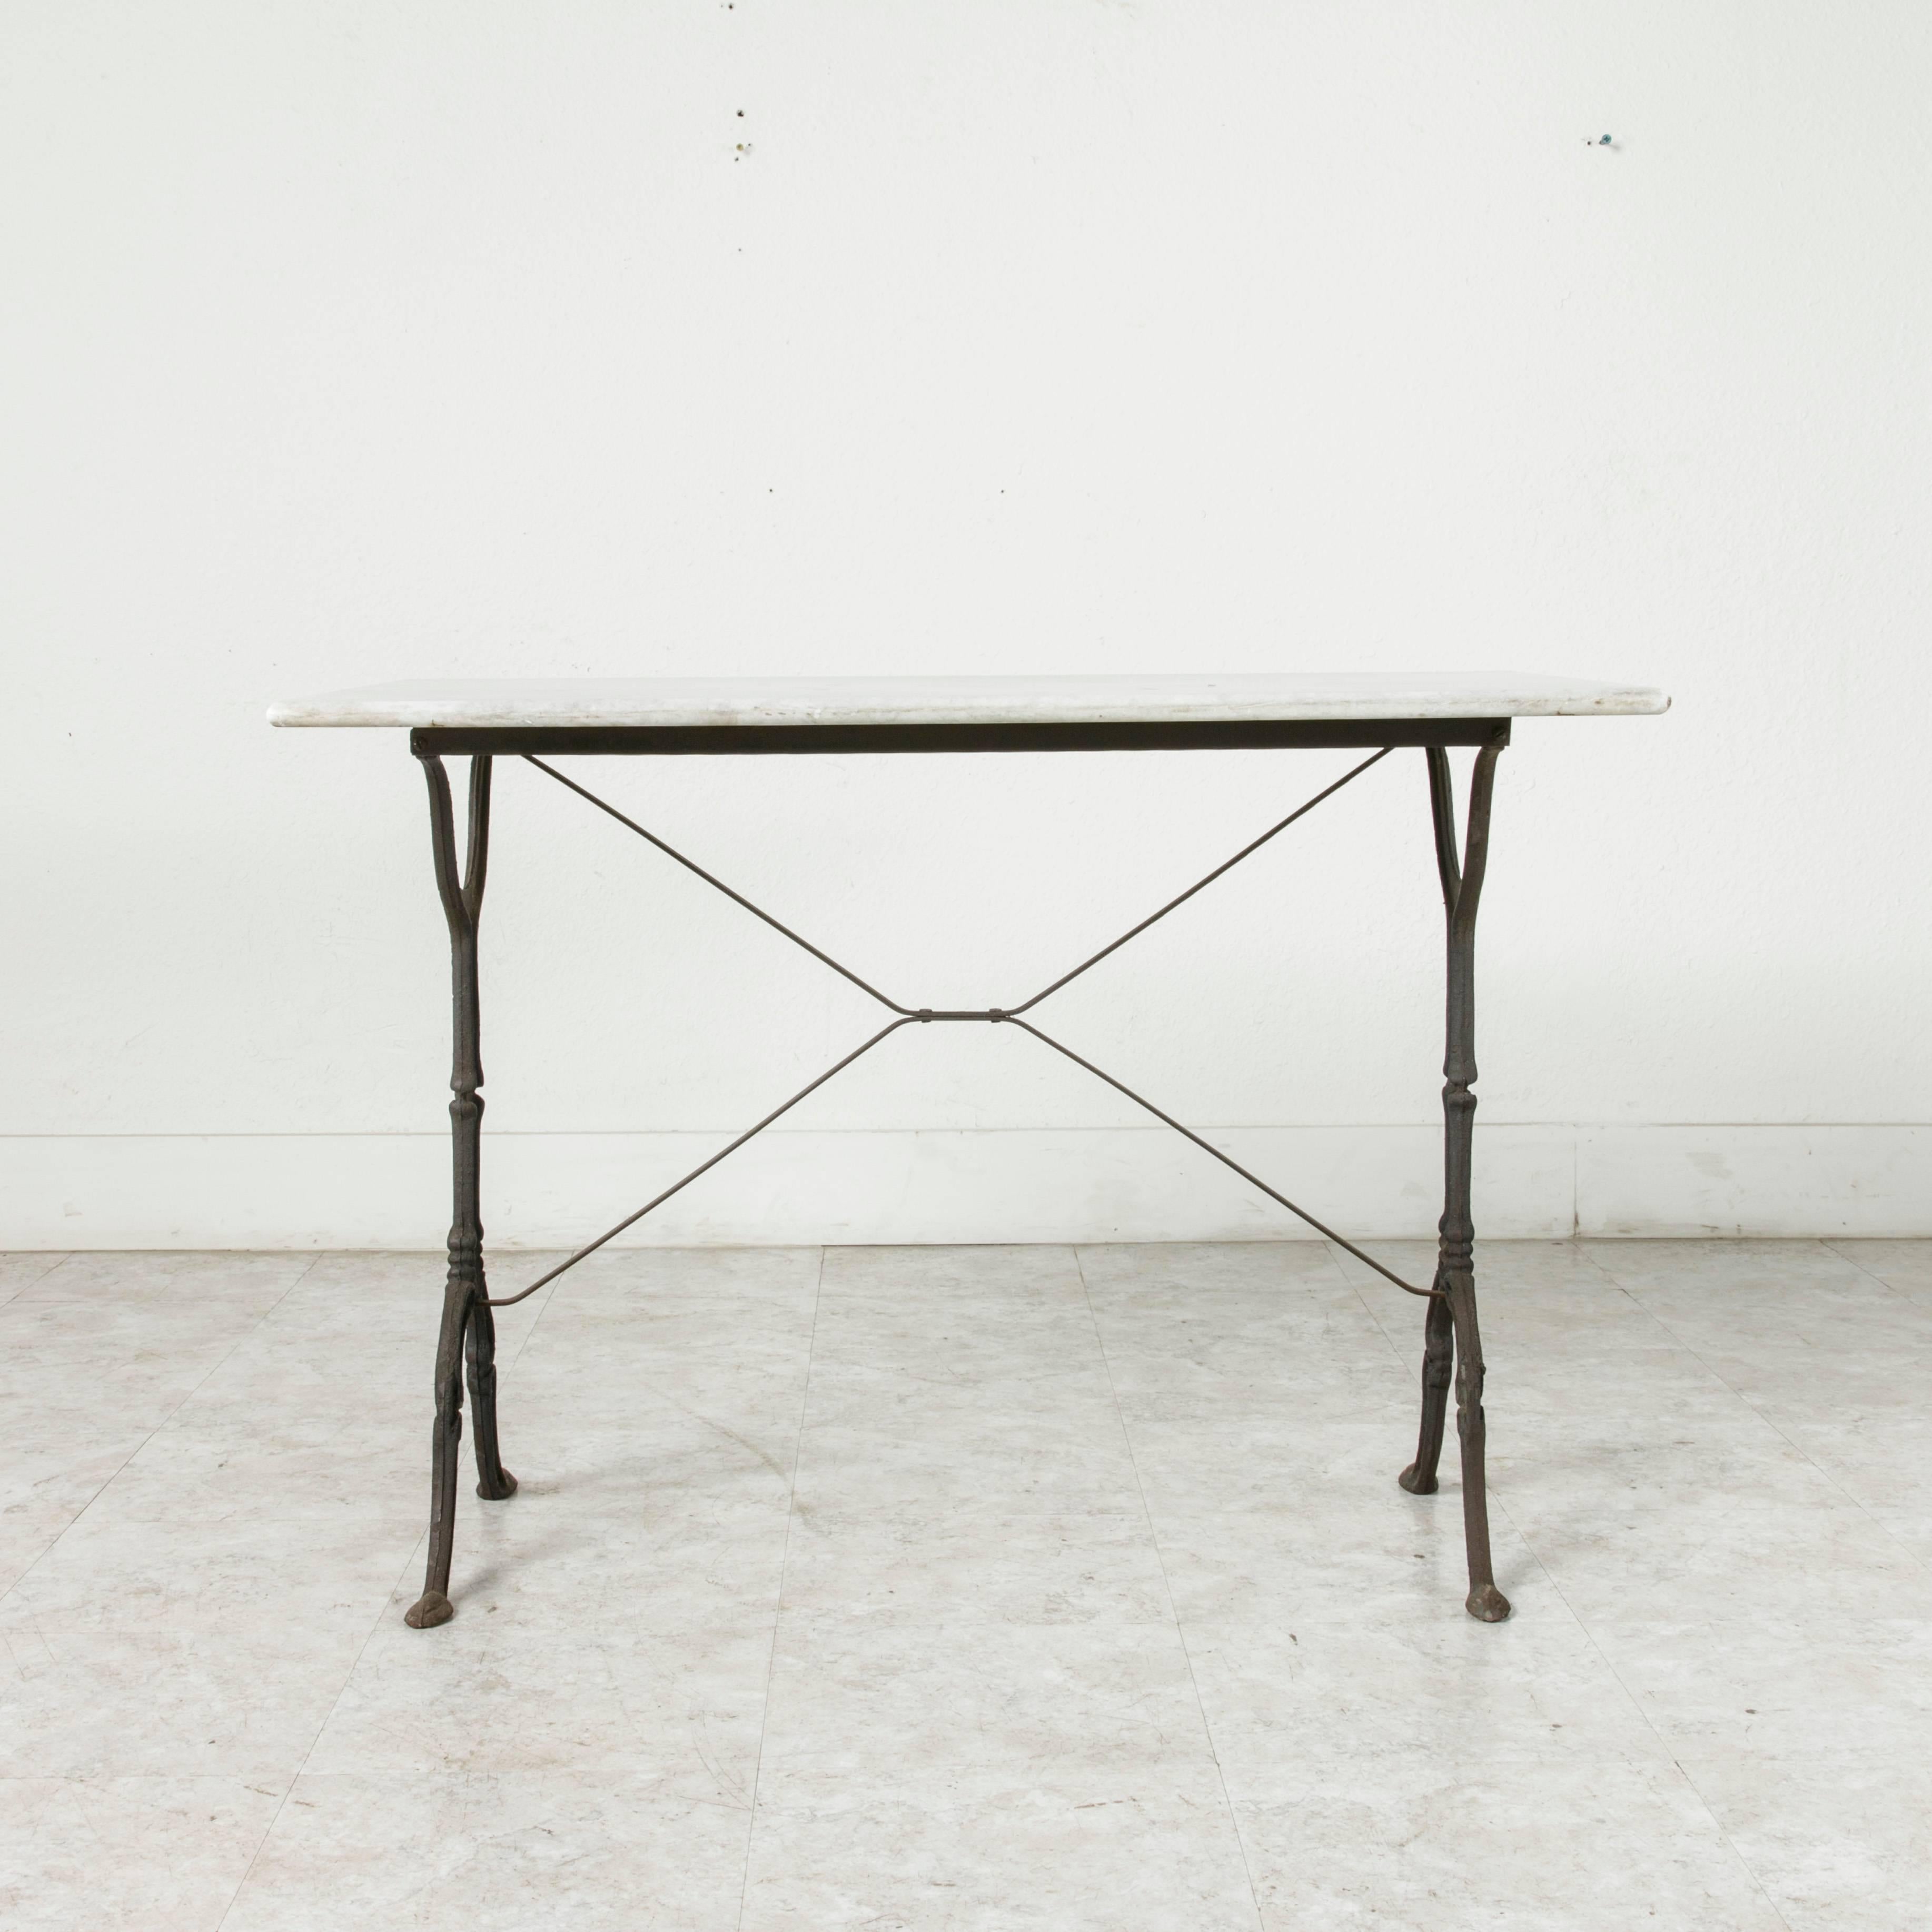 French Mid-20th Century Iron Bistro Table, Cafe Table, Garden Table with Marble Top